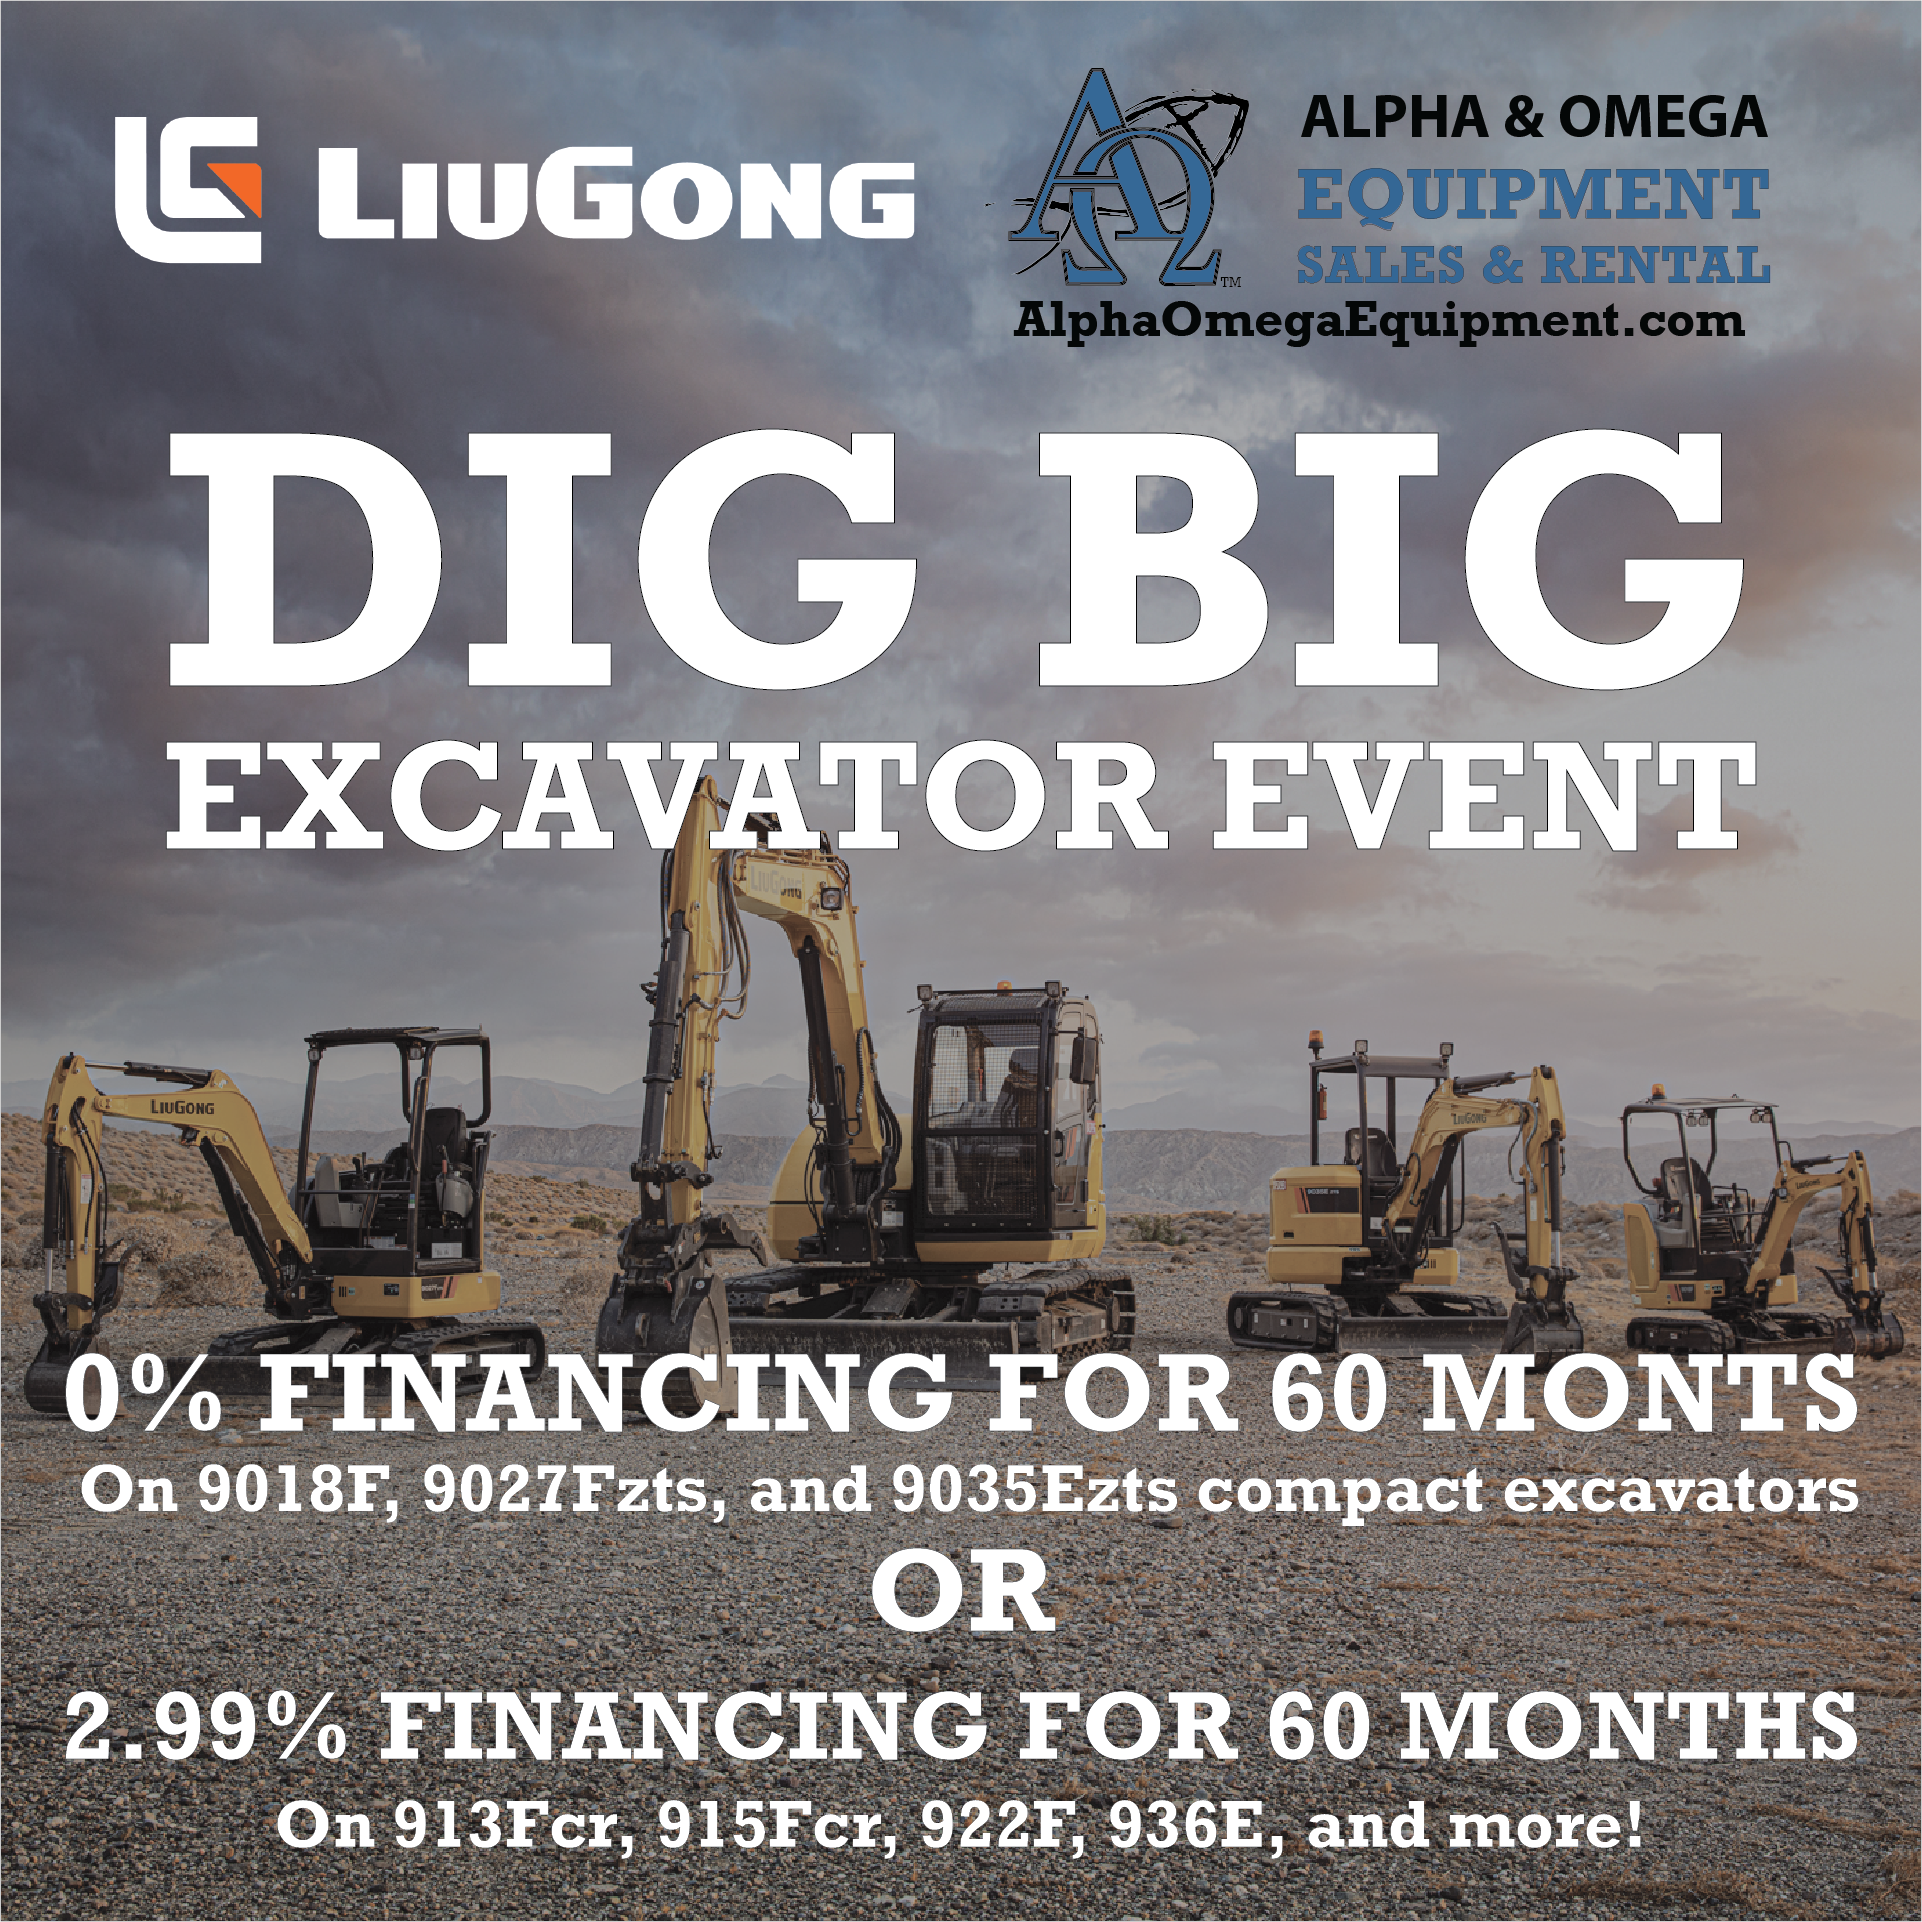 Finance a brand new Liugong 903E Excavator for as low as 1196 per month